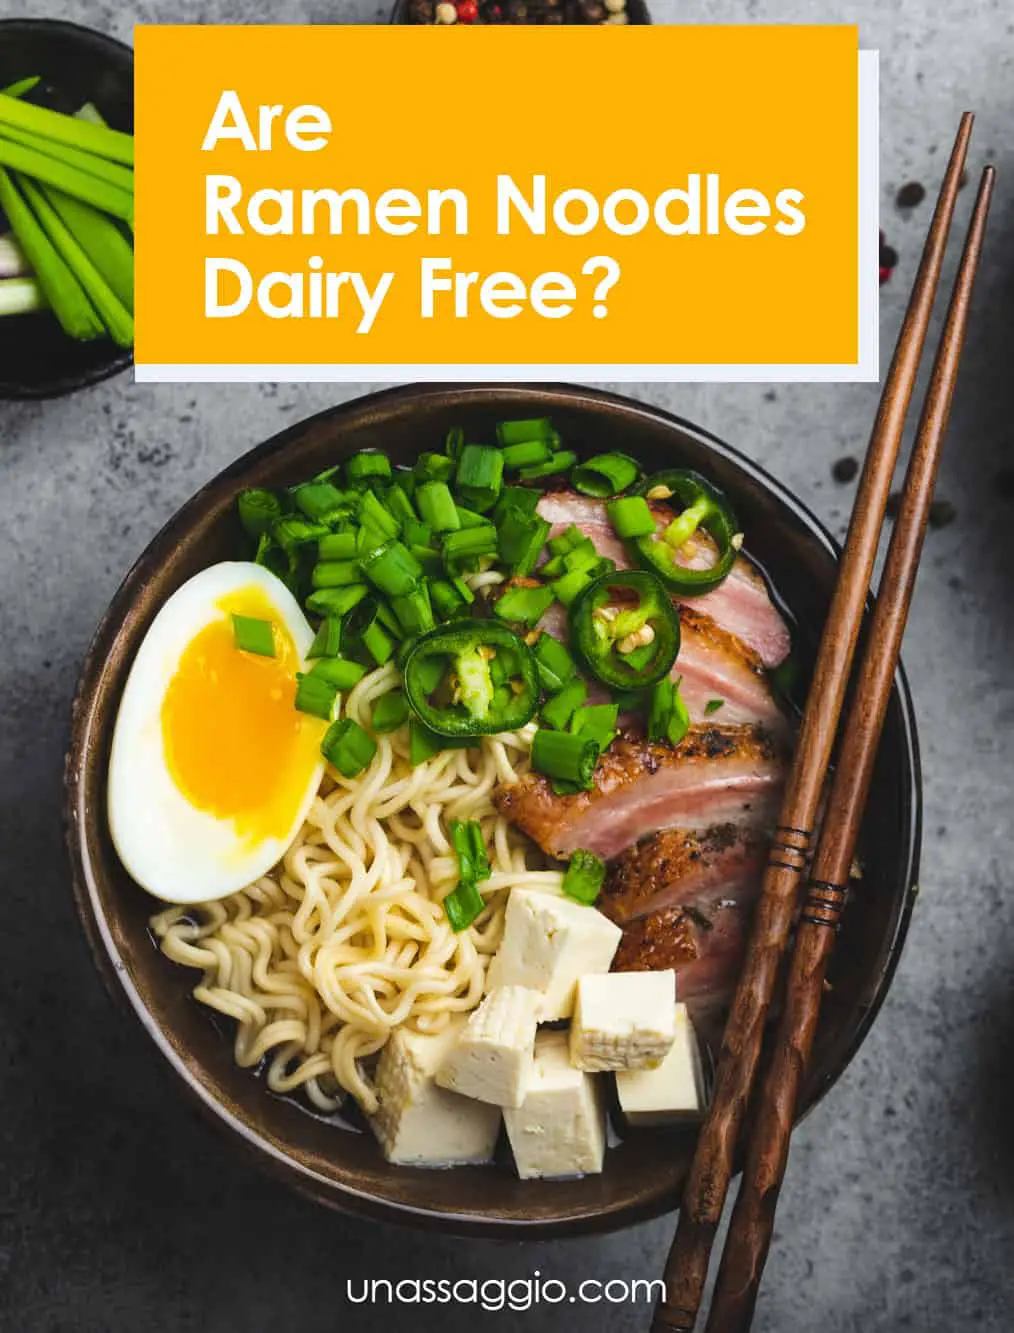 Are Ramen Noodles Dairy Free?